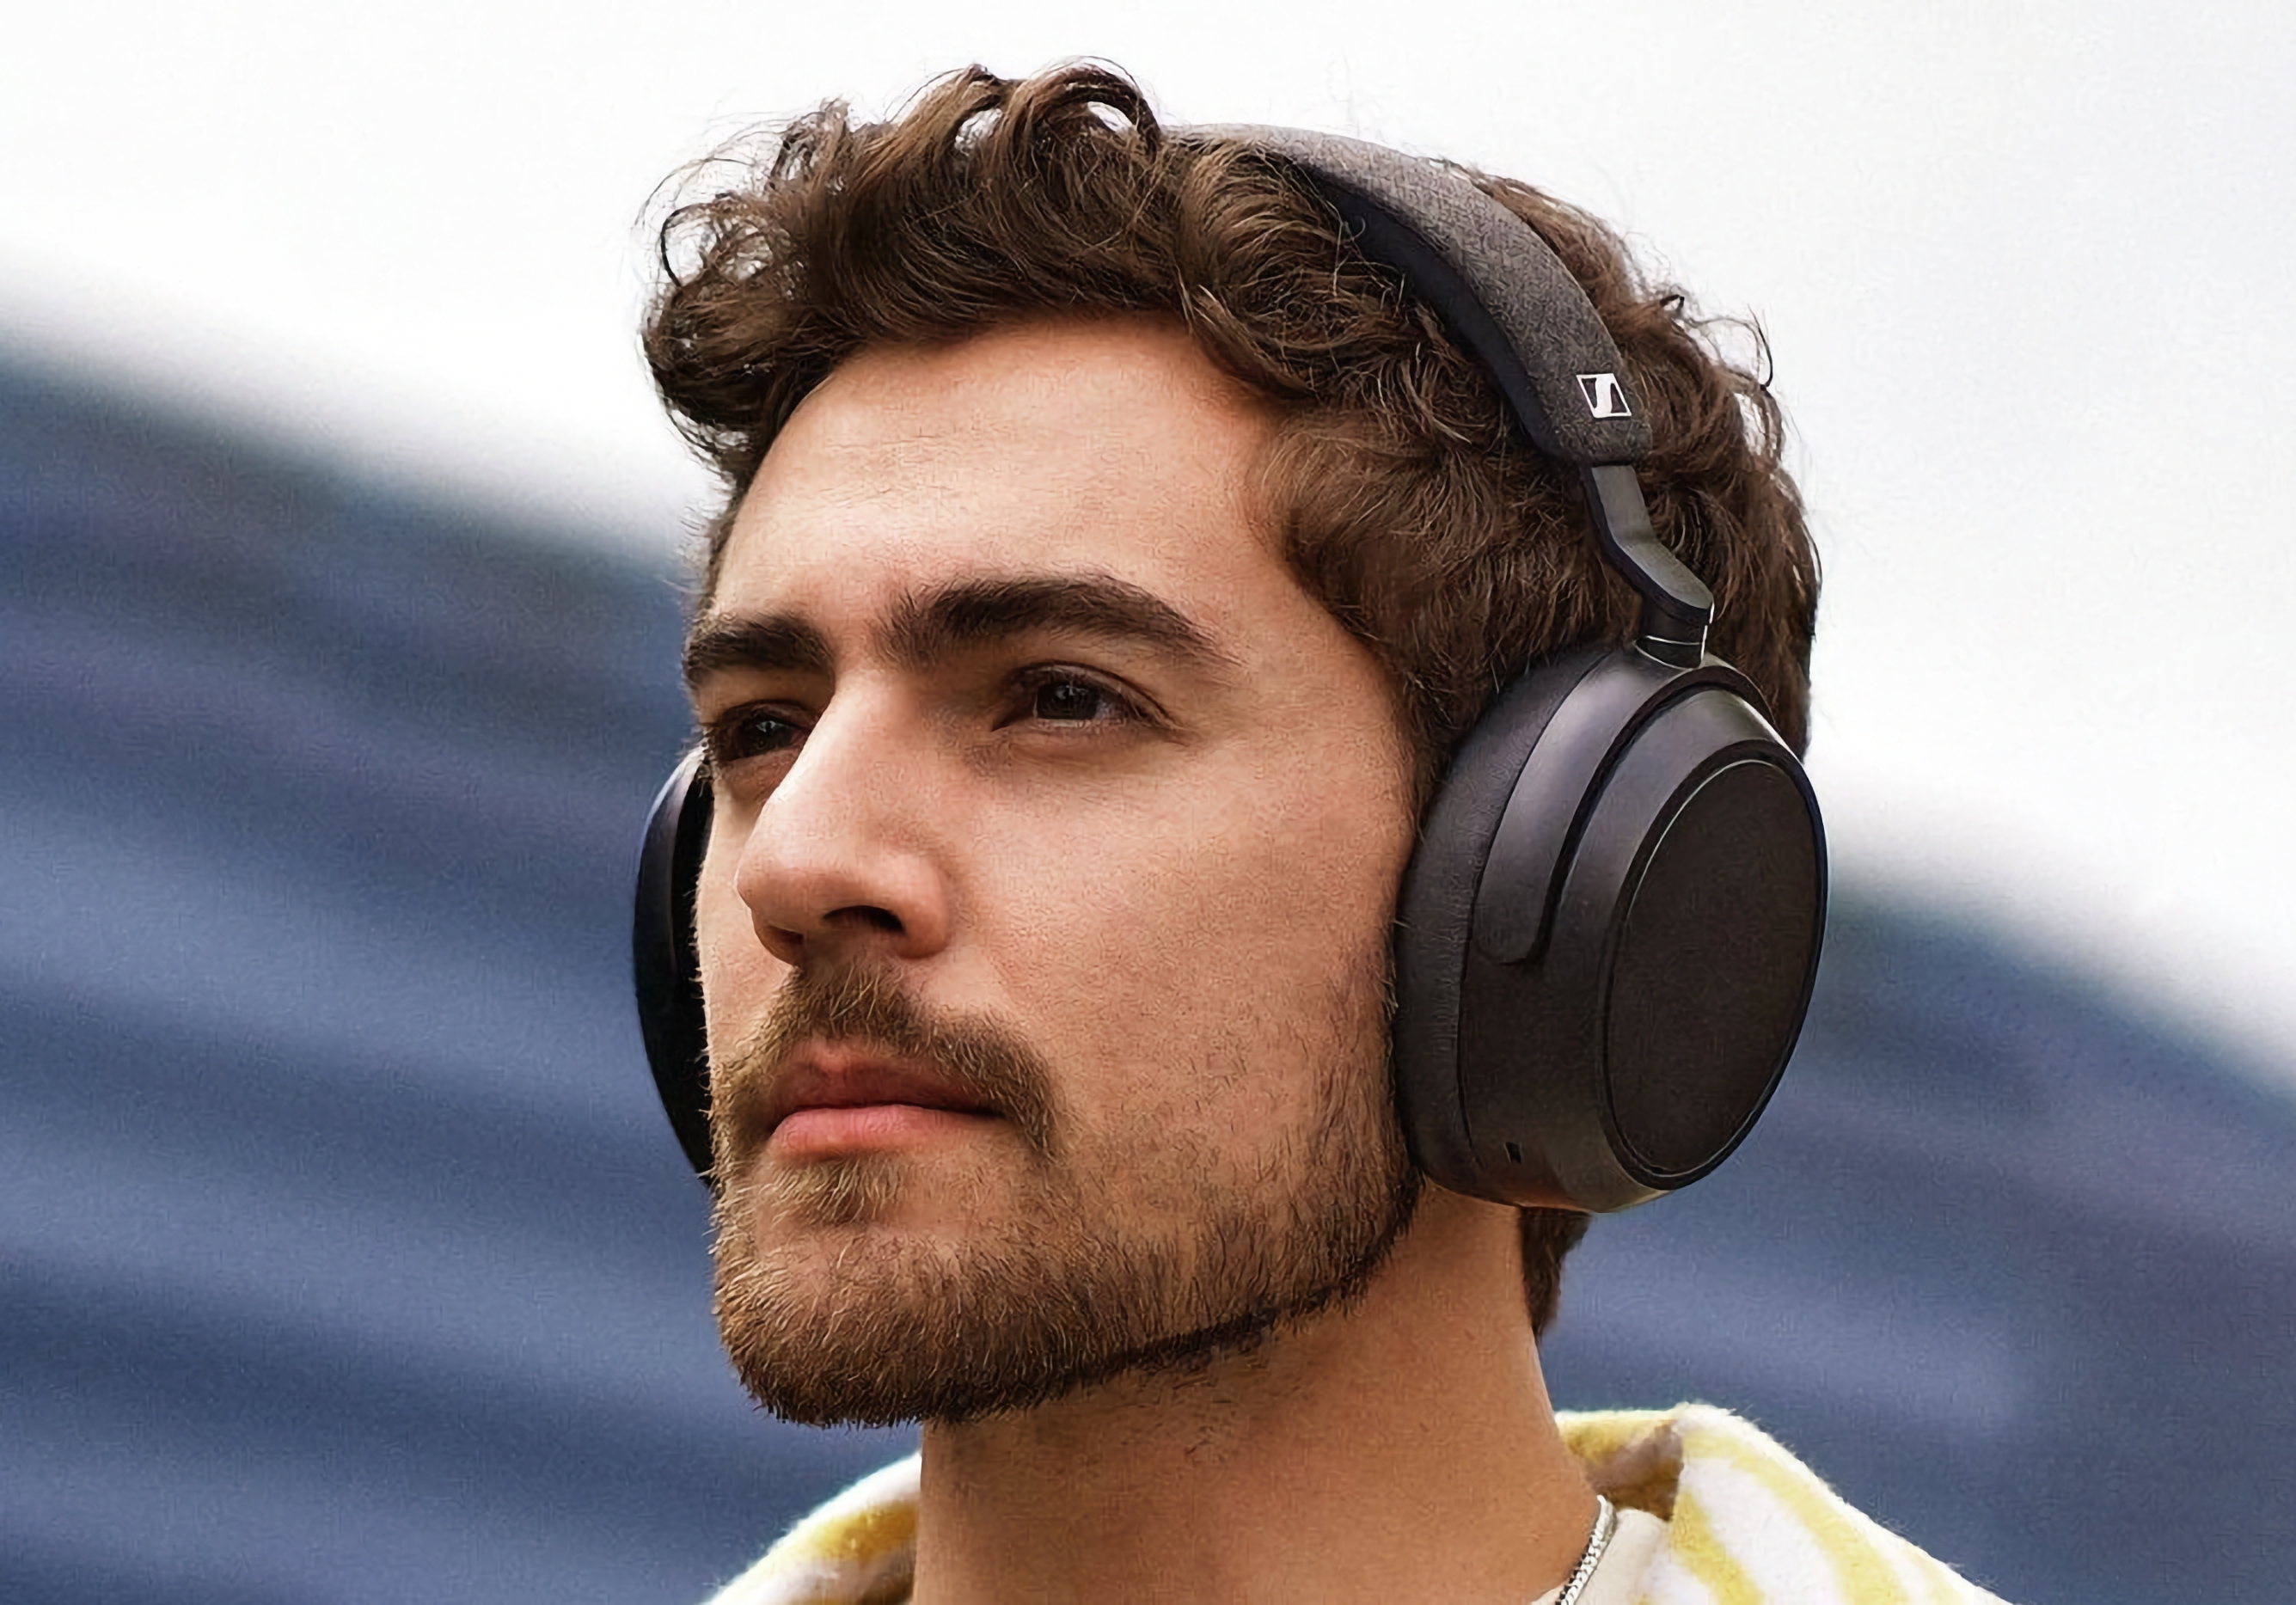 Sennheiser Momentum 4 on Amazon: wireless headphones with adaptive ANC and up to 60 hours of battery life at a discounted price of $90